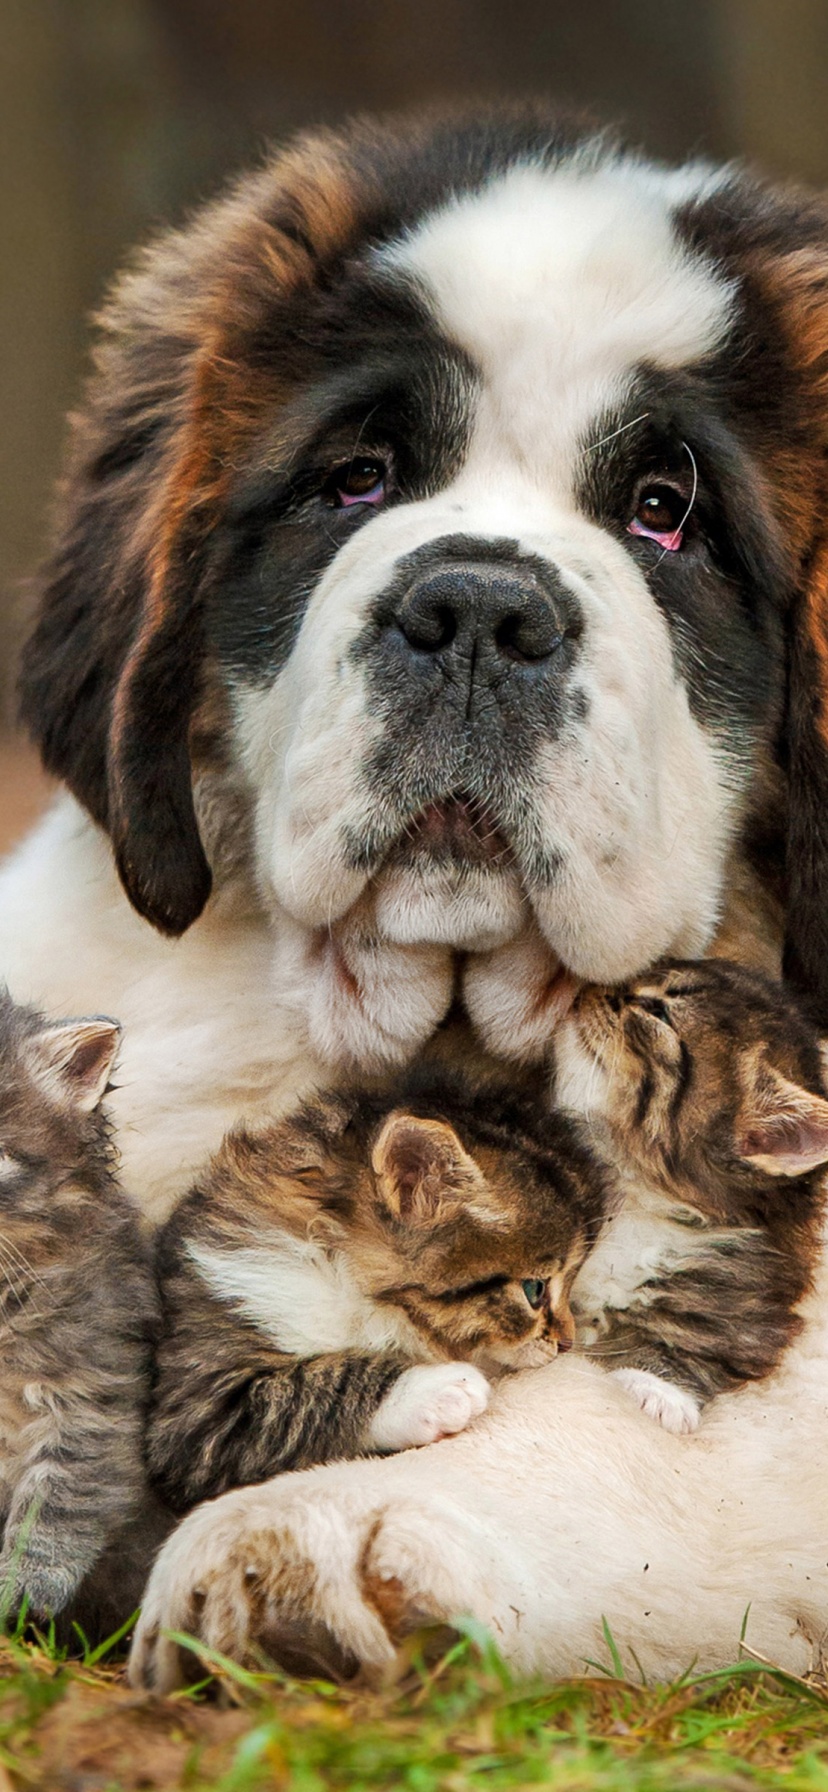 Dog And Kittens